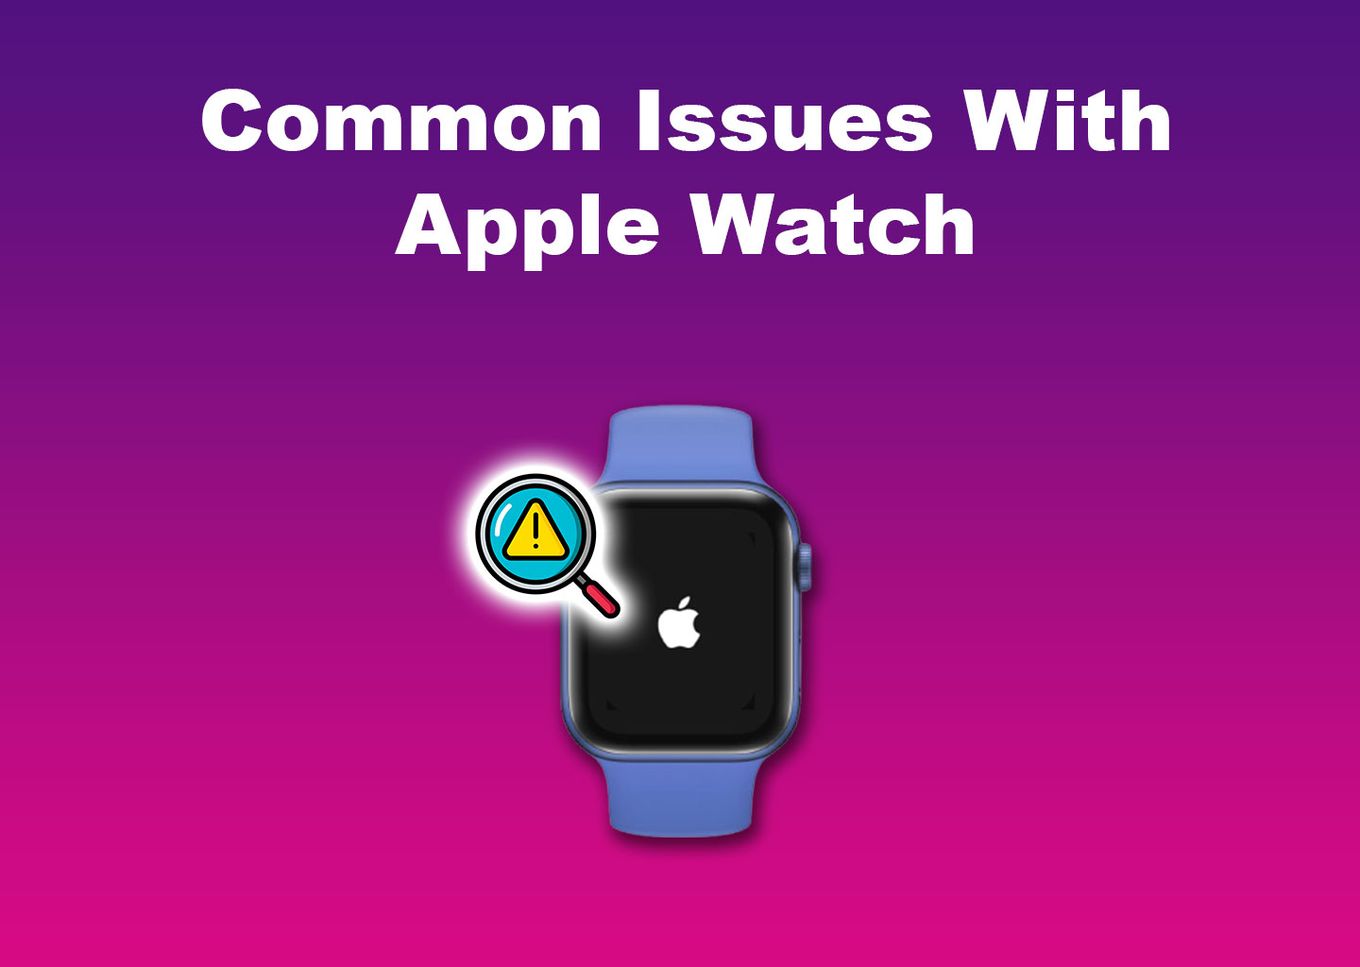 Common Issues with Apple Watch